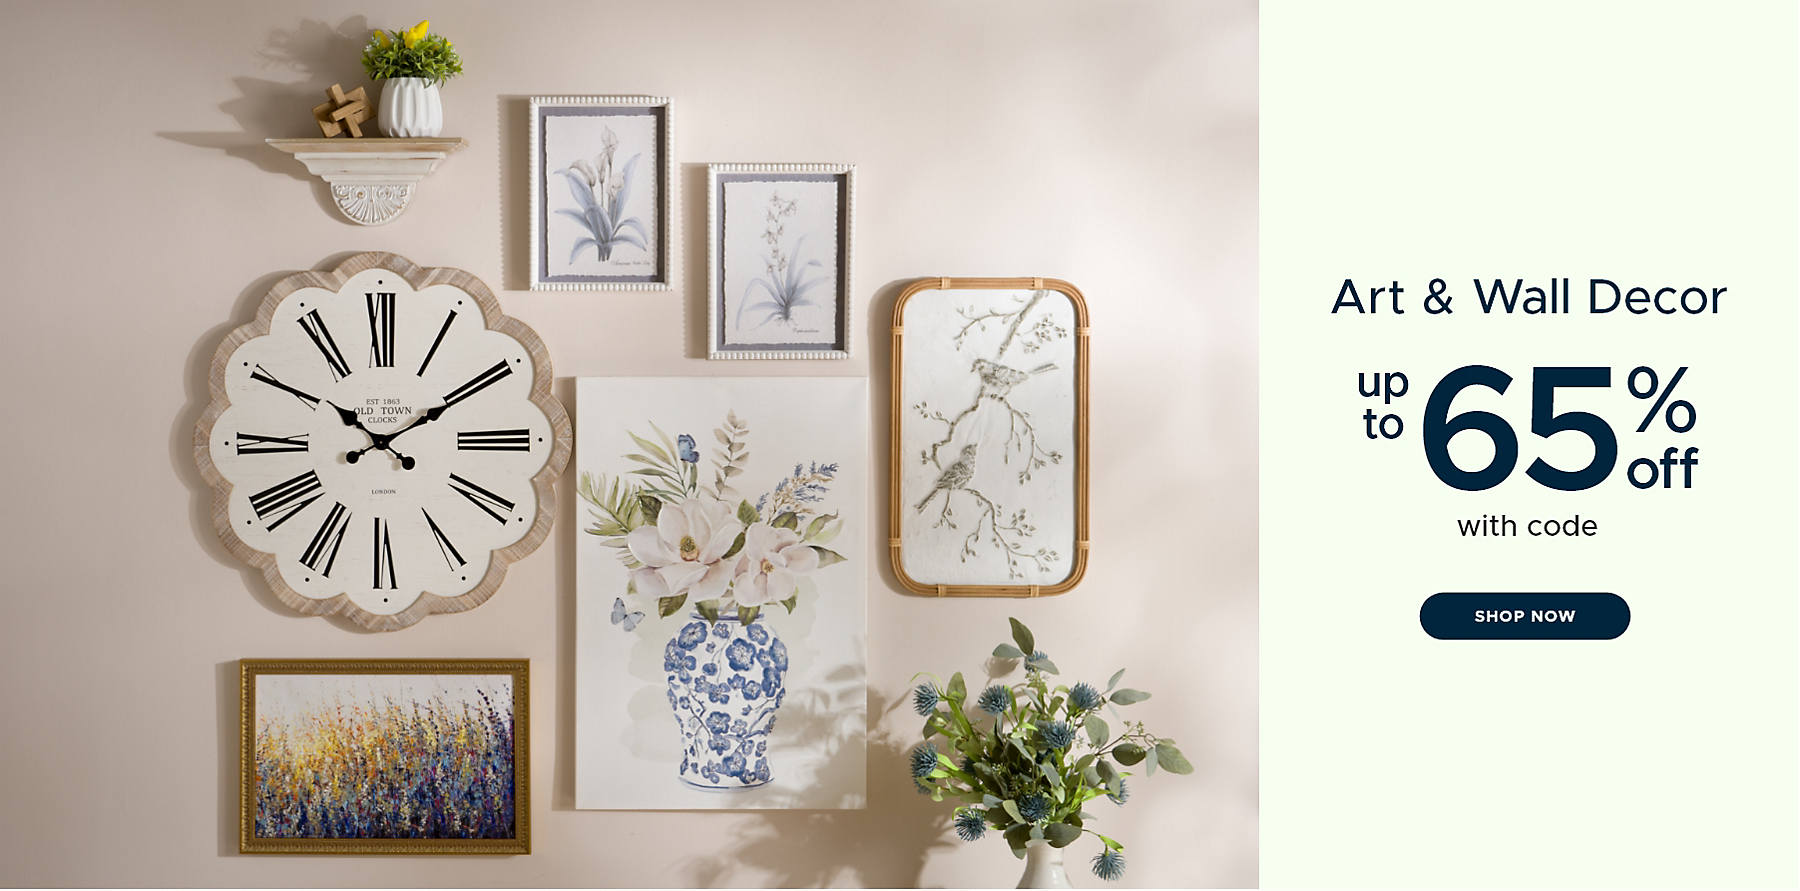 Art & Wall Decor up to 65% off with code shop now